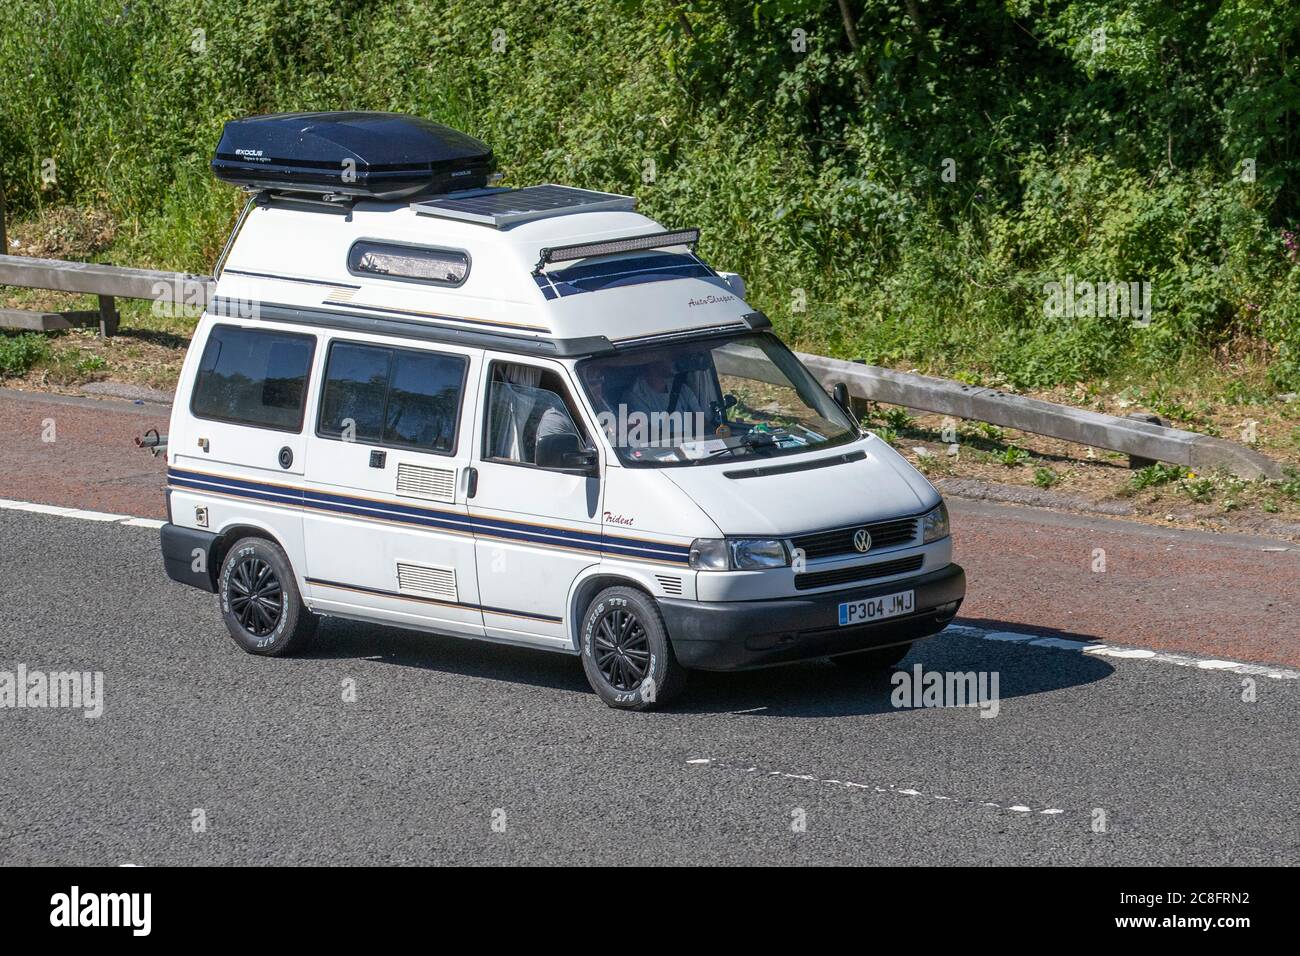 1996 90s white VW Volkswagen 1000 TD SWB; Touring Caravans and Motorhomes, campervans on Britain's roads, RV leisure vehicle, family holidays, caravanette vacations, caravan holiday, van conversions, autohome, life on the road, Stock Photo